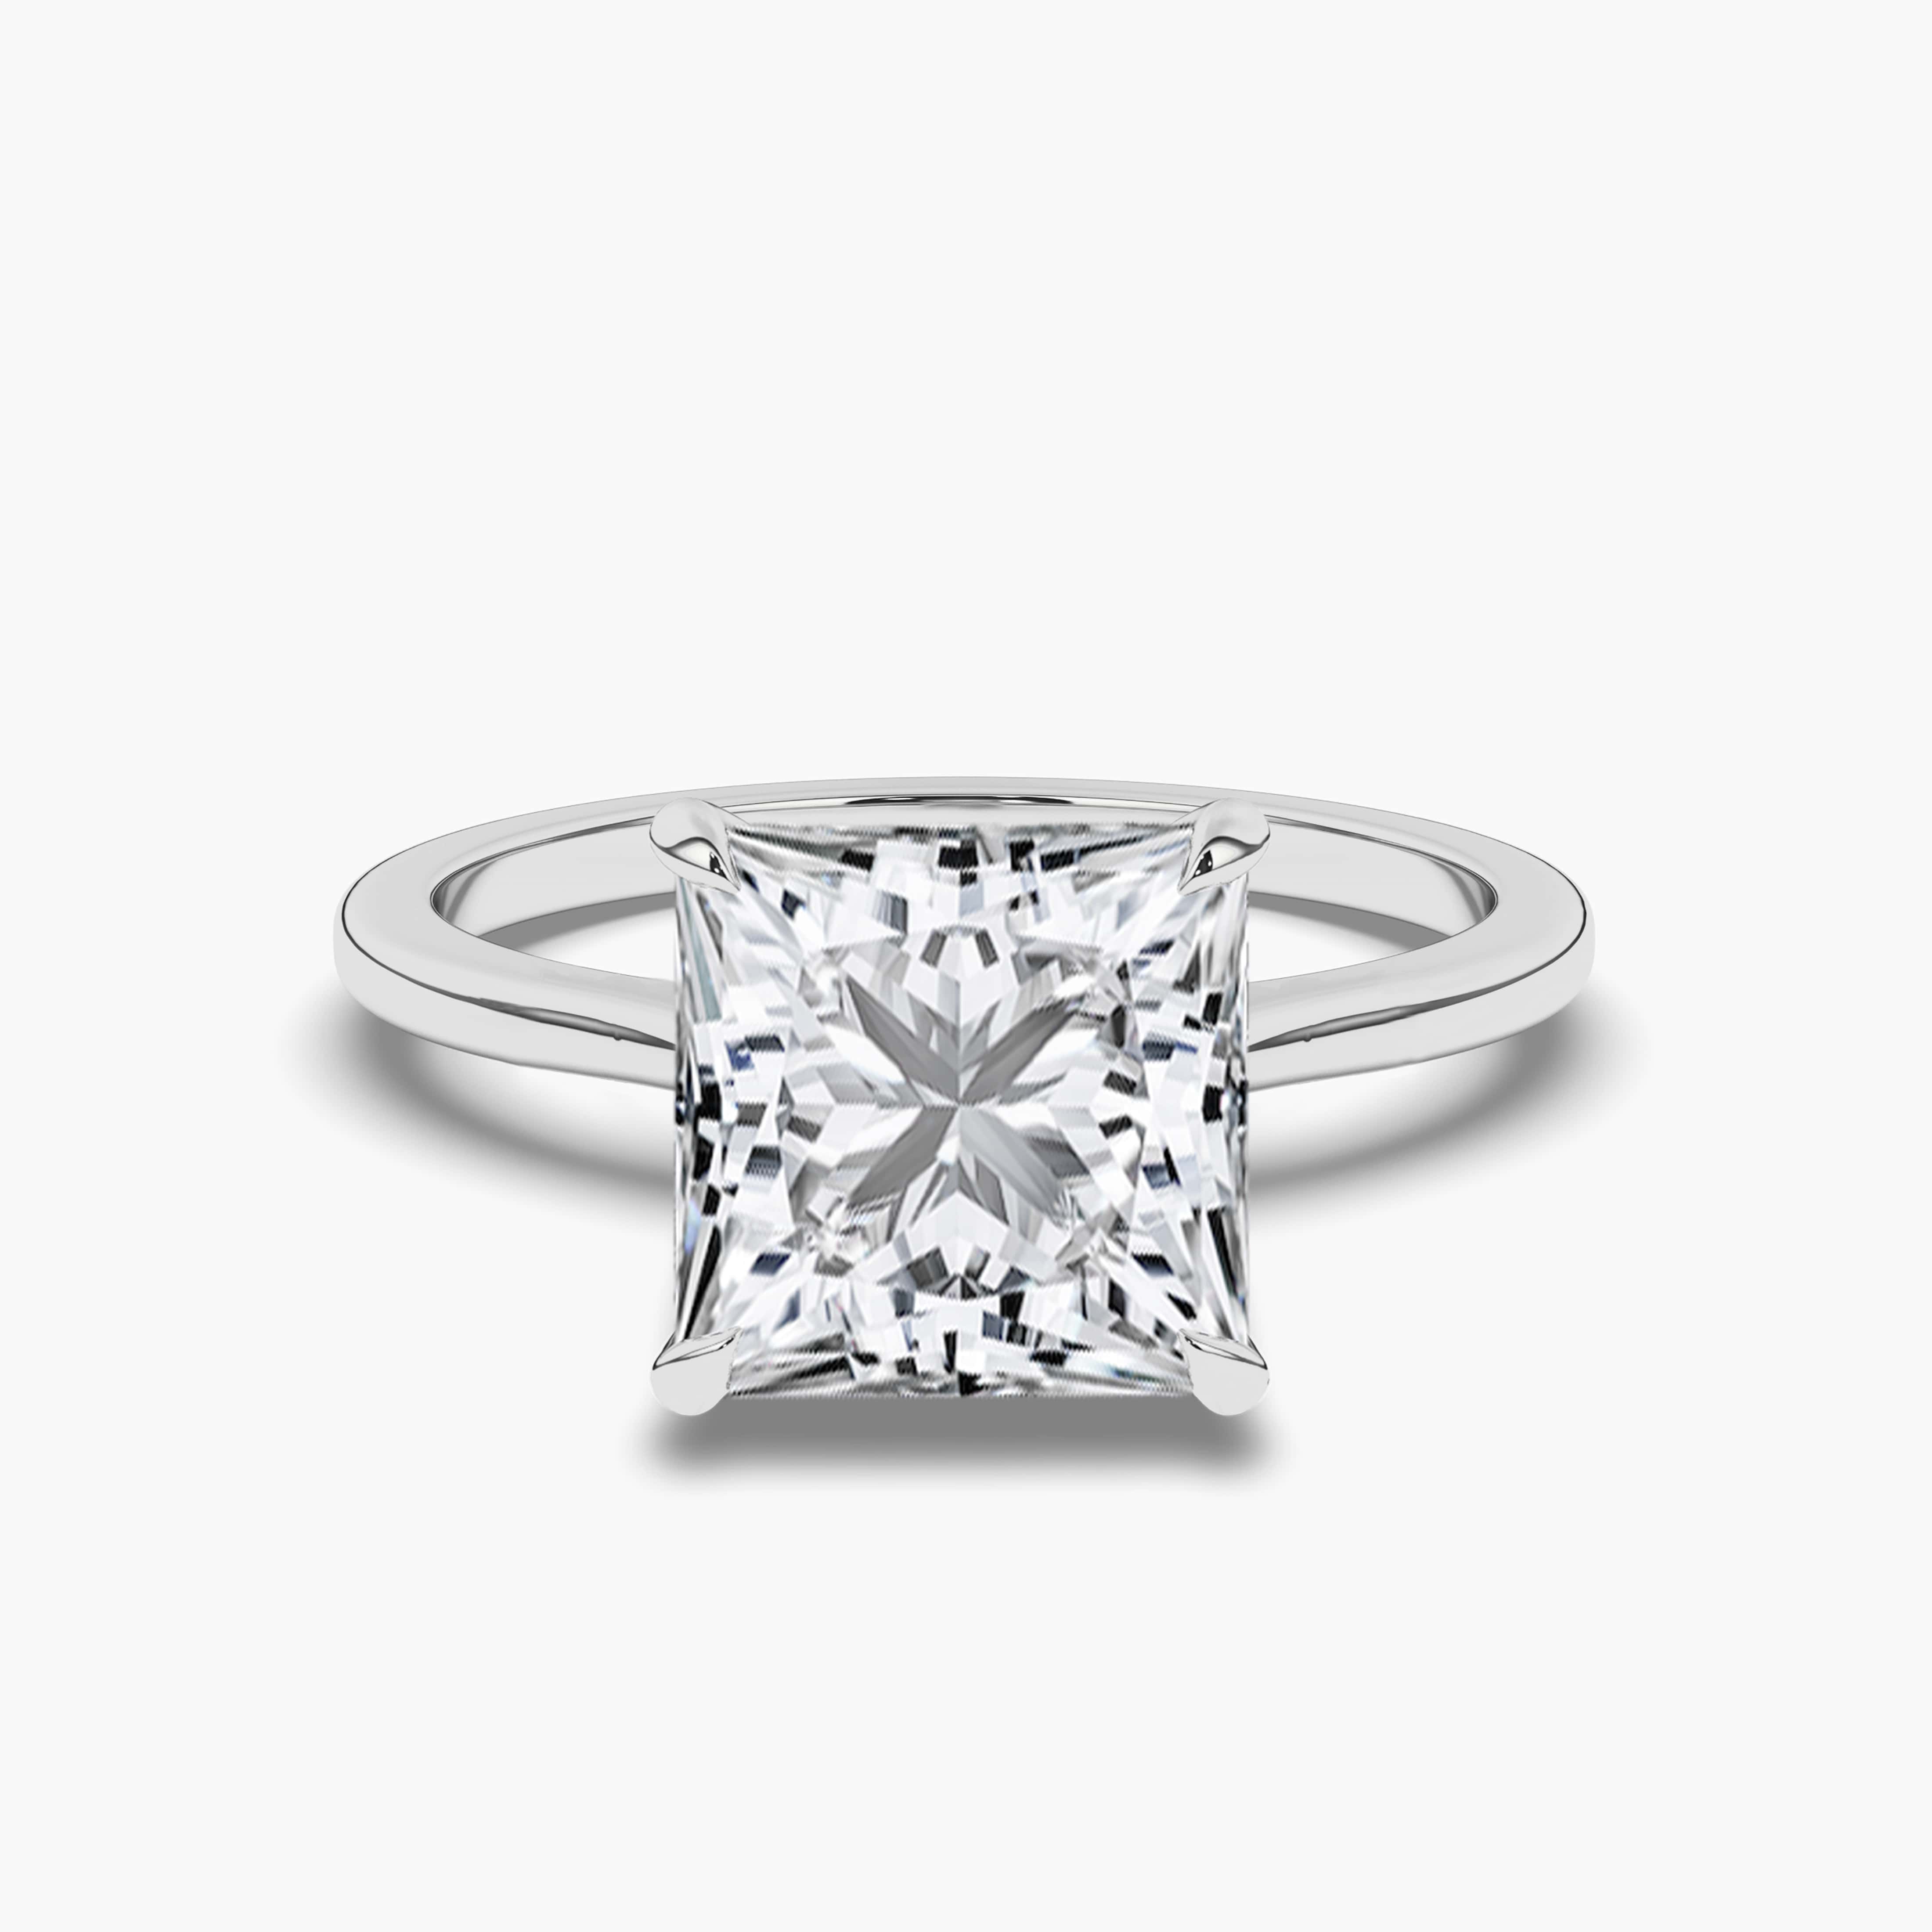 Princess-Cut Diamond  Prong Solitaire Engagement Ring in White Gold